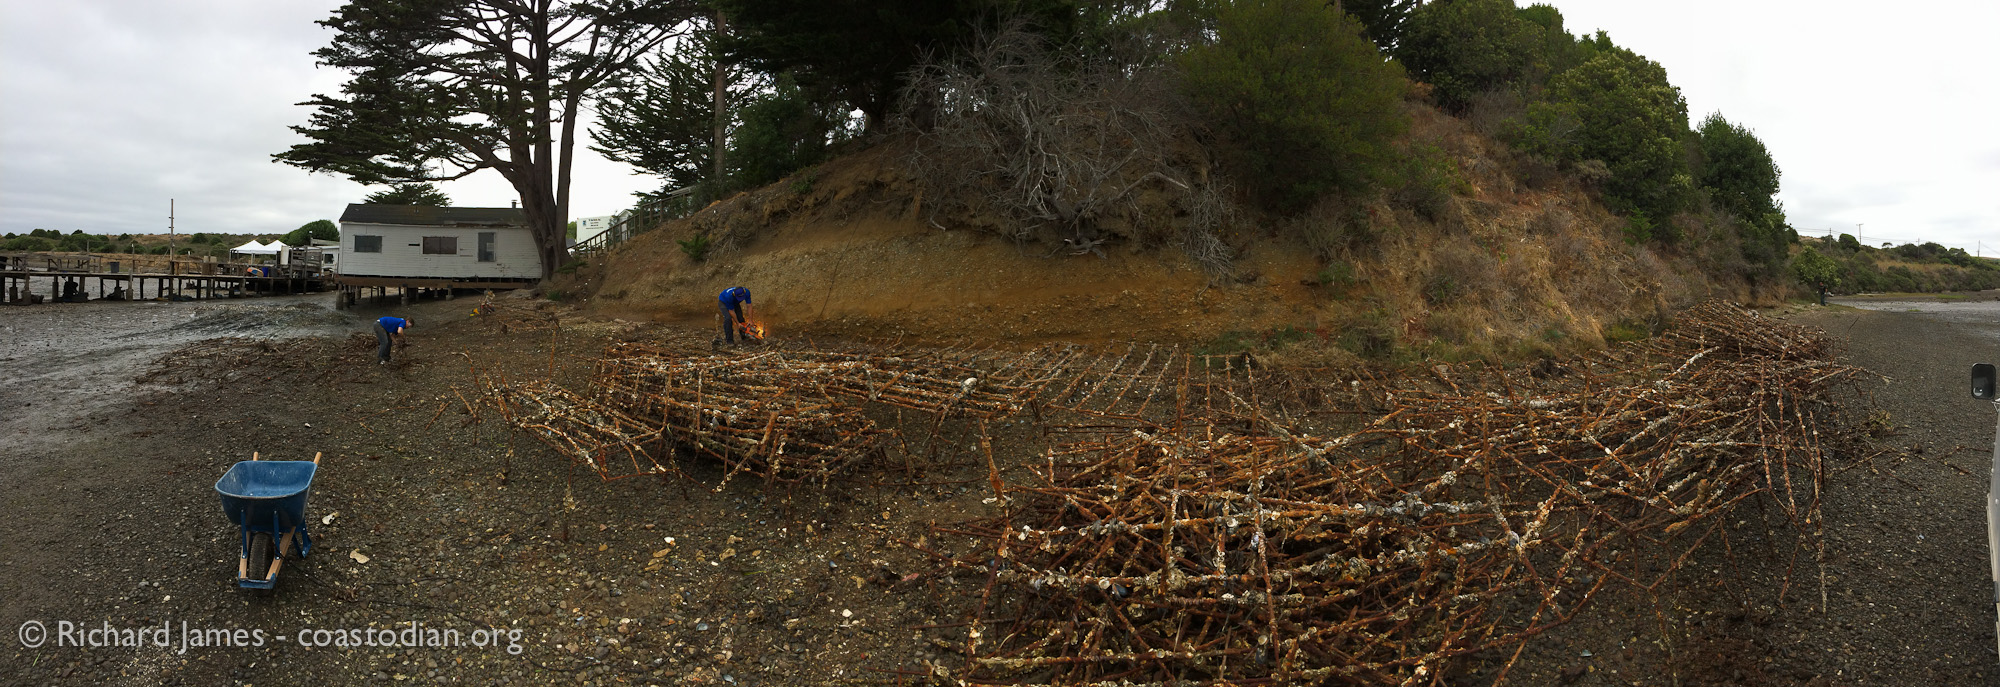 Panorama of the area blighted by Tomales Bay Oyster Company, in the process of being de-blighted.